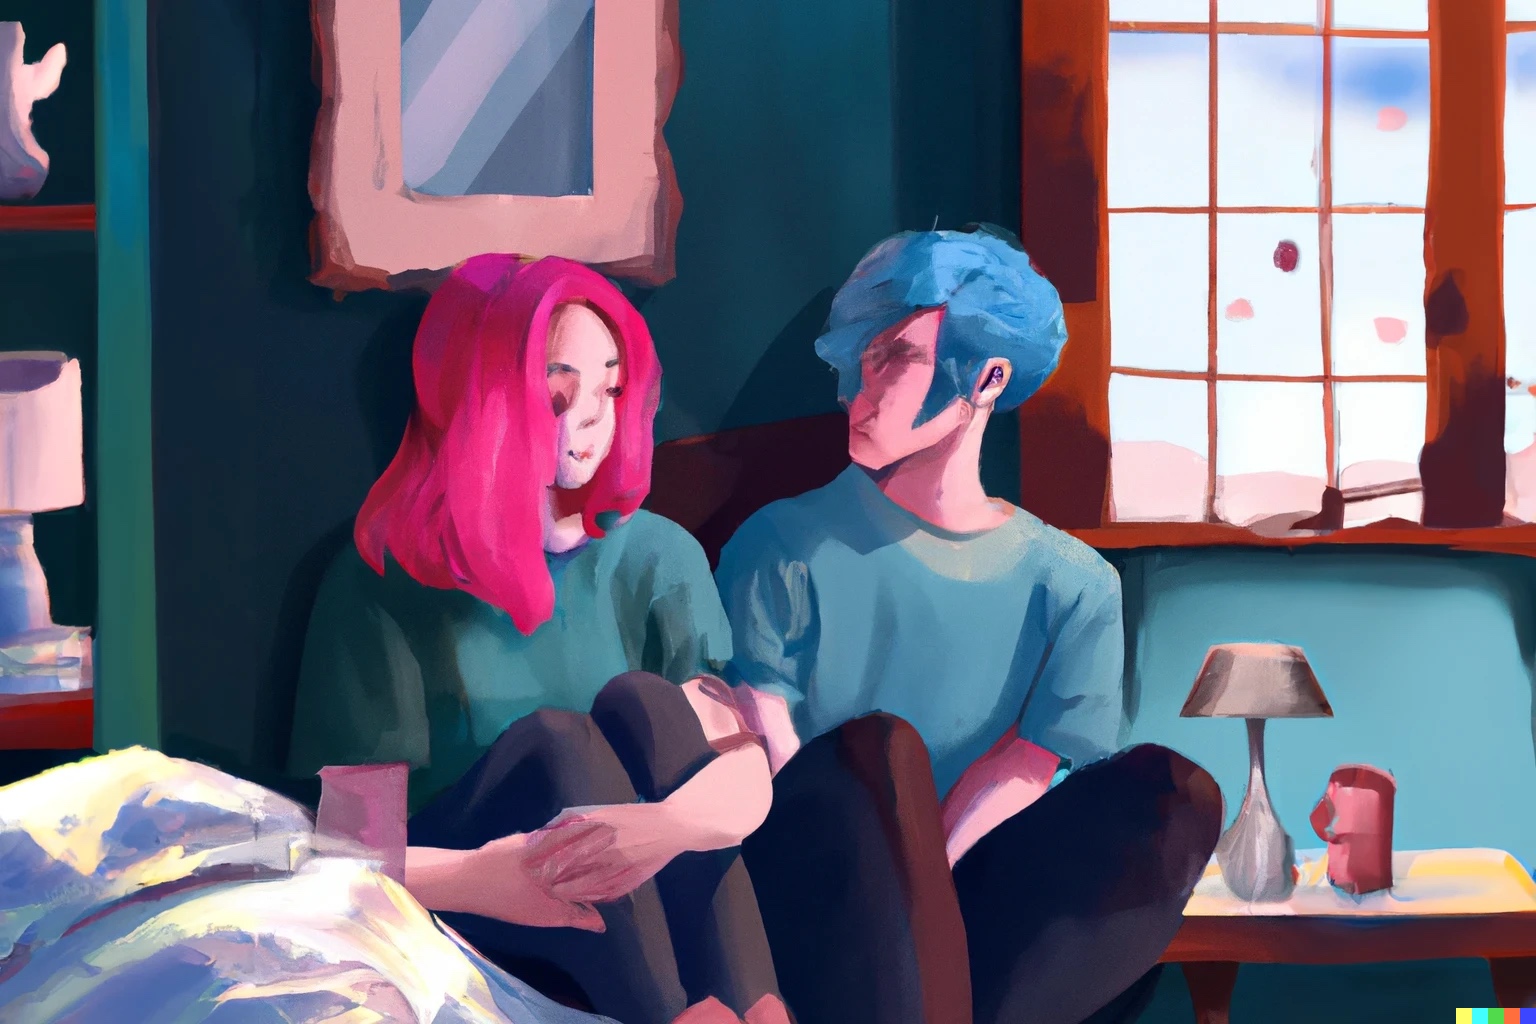 A pink-haired woman and a blue-haired man talking while sitting on the bed by the window sill.